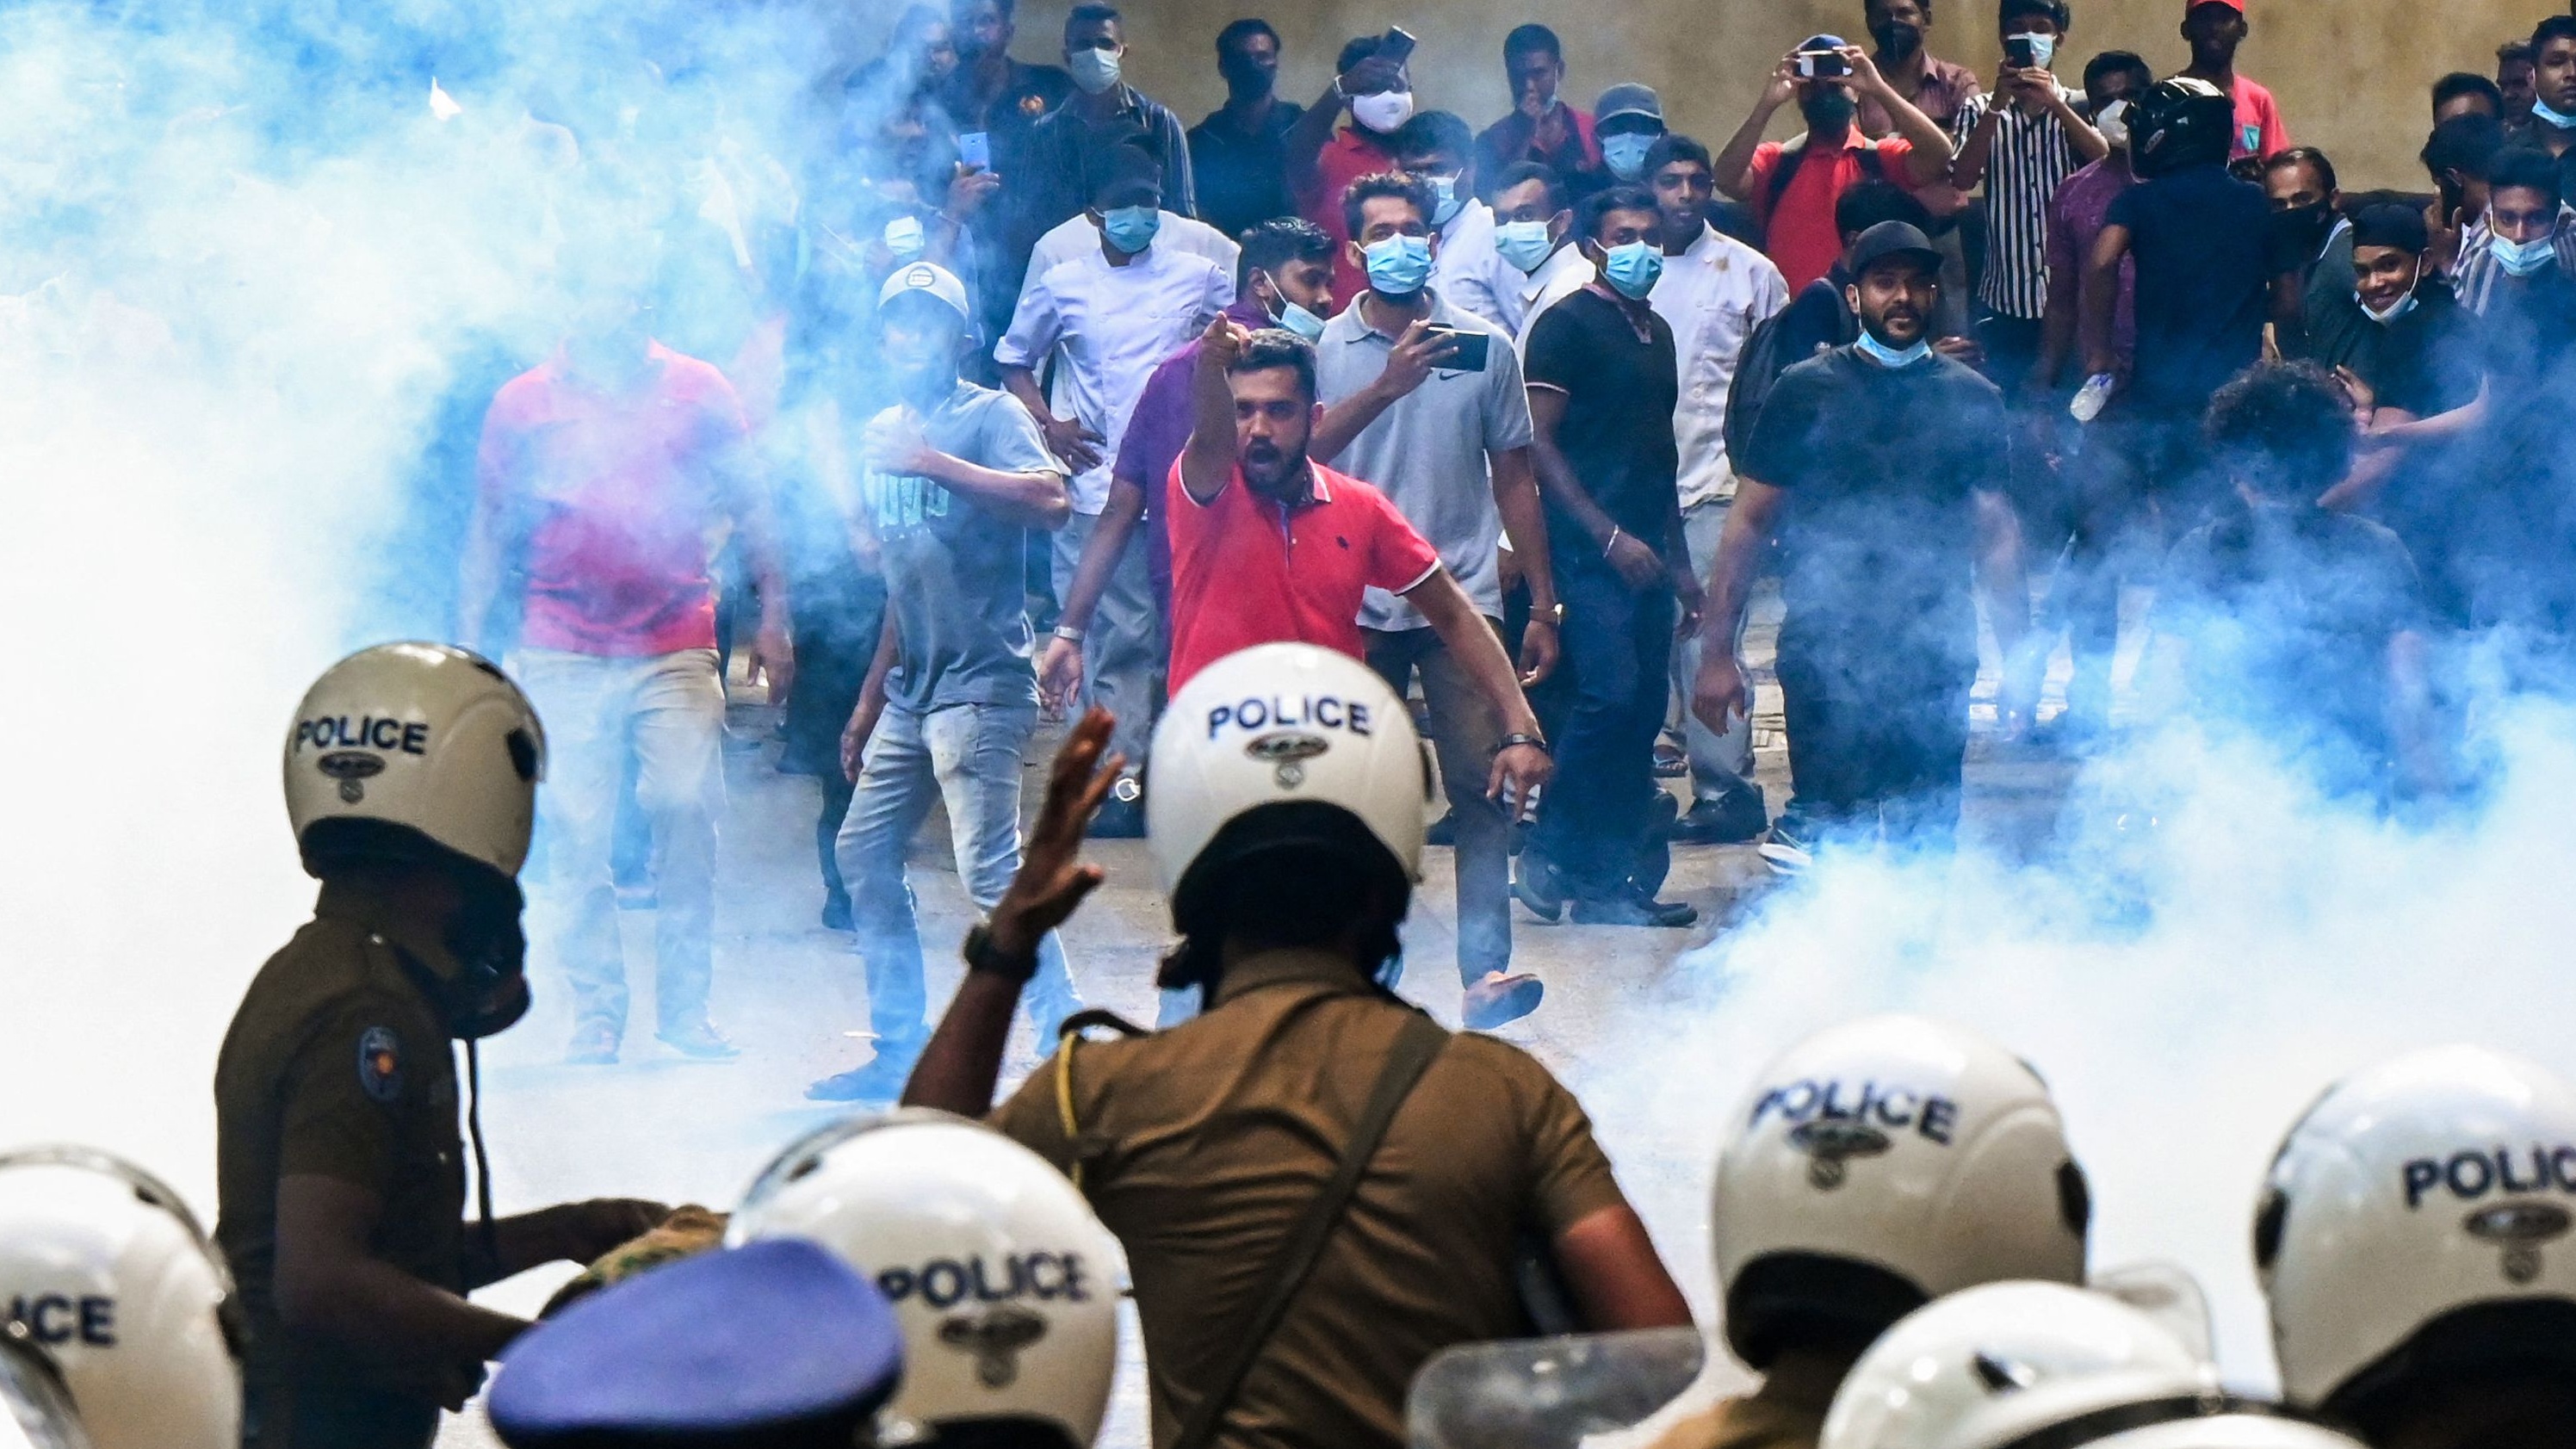 Sri Lankans clash with police in Colombo amid the country’s economic crisis